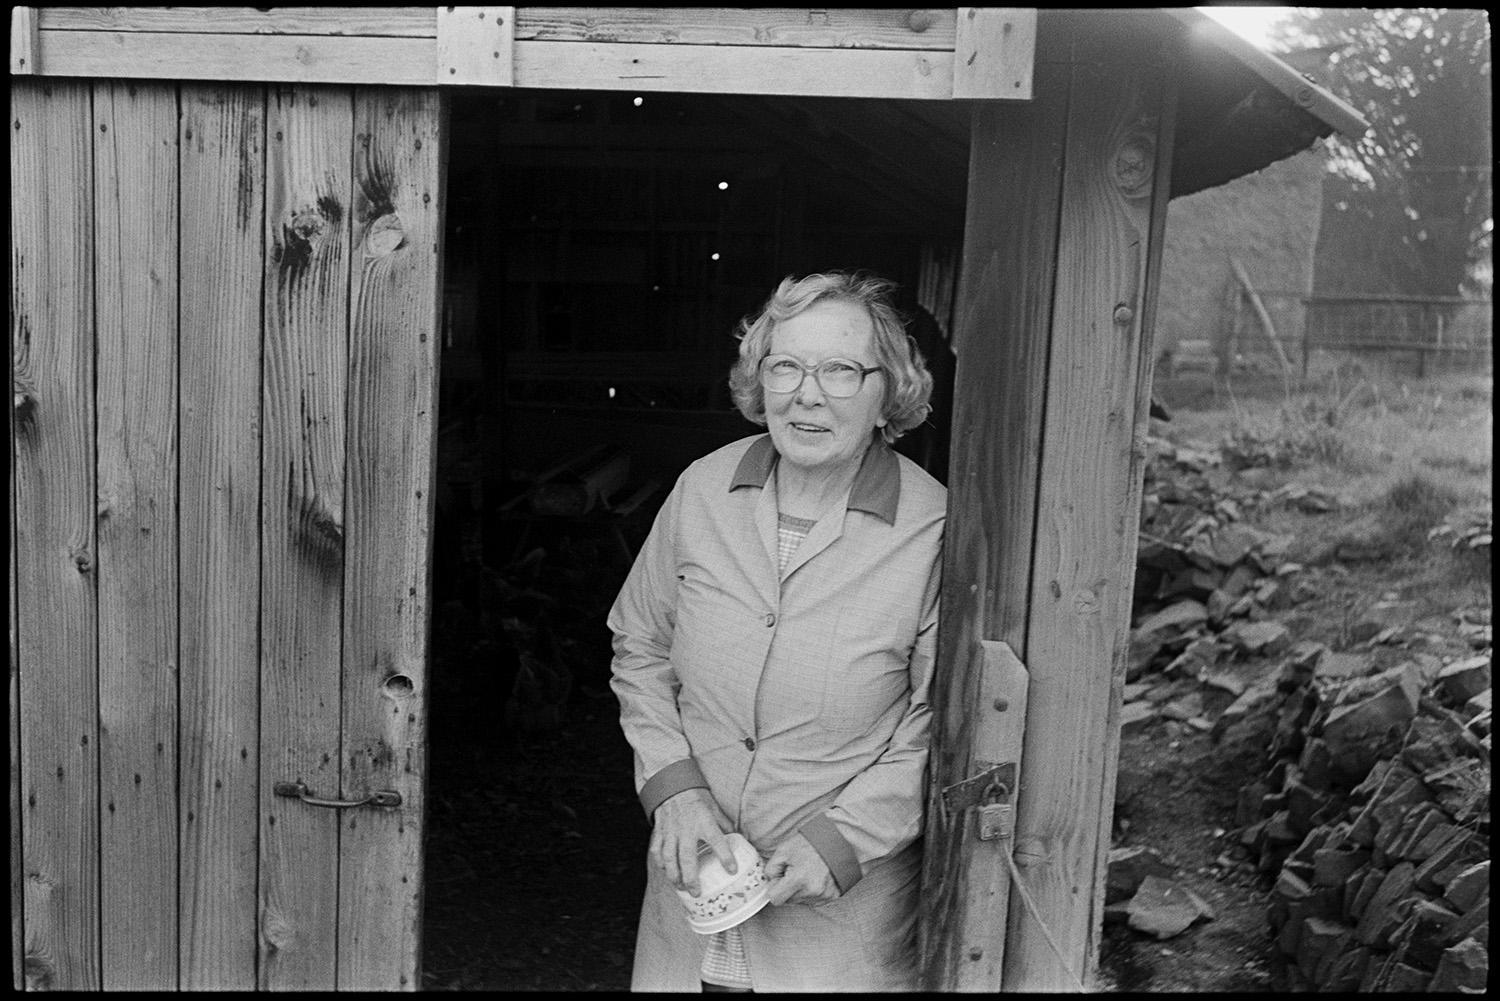 Farmers wife woman feeding chickens. 
[May Pugsley stood at the entrance to a wooden poultry house at Lower Langham, Dolton. She has been feeding the chickens in the poultry house.]